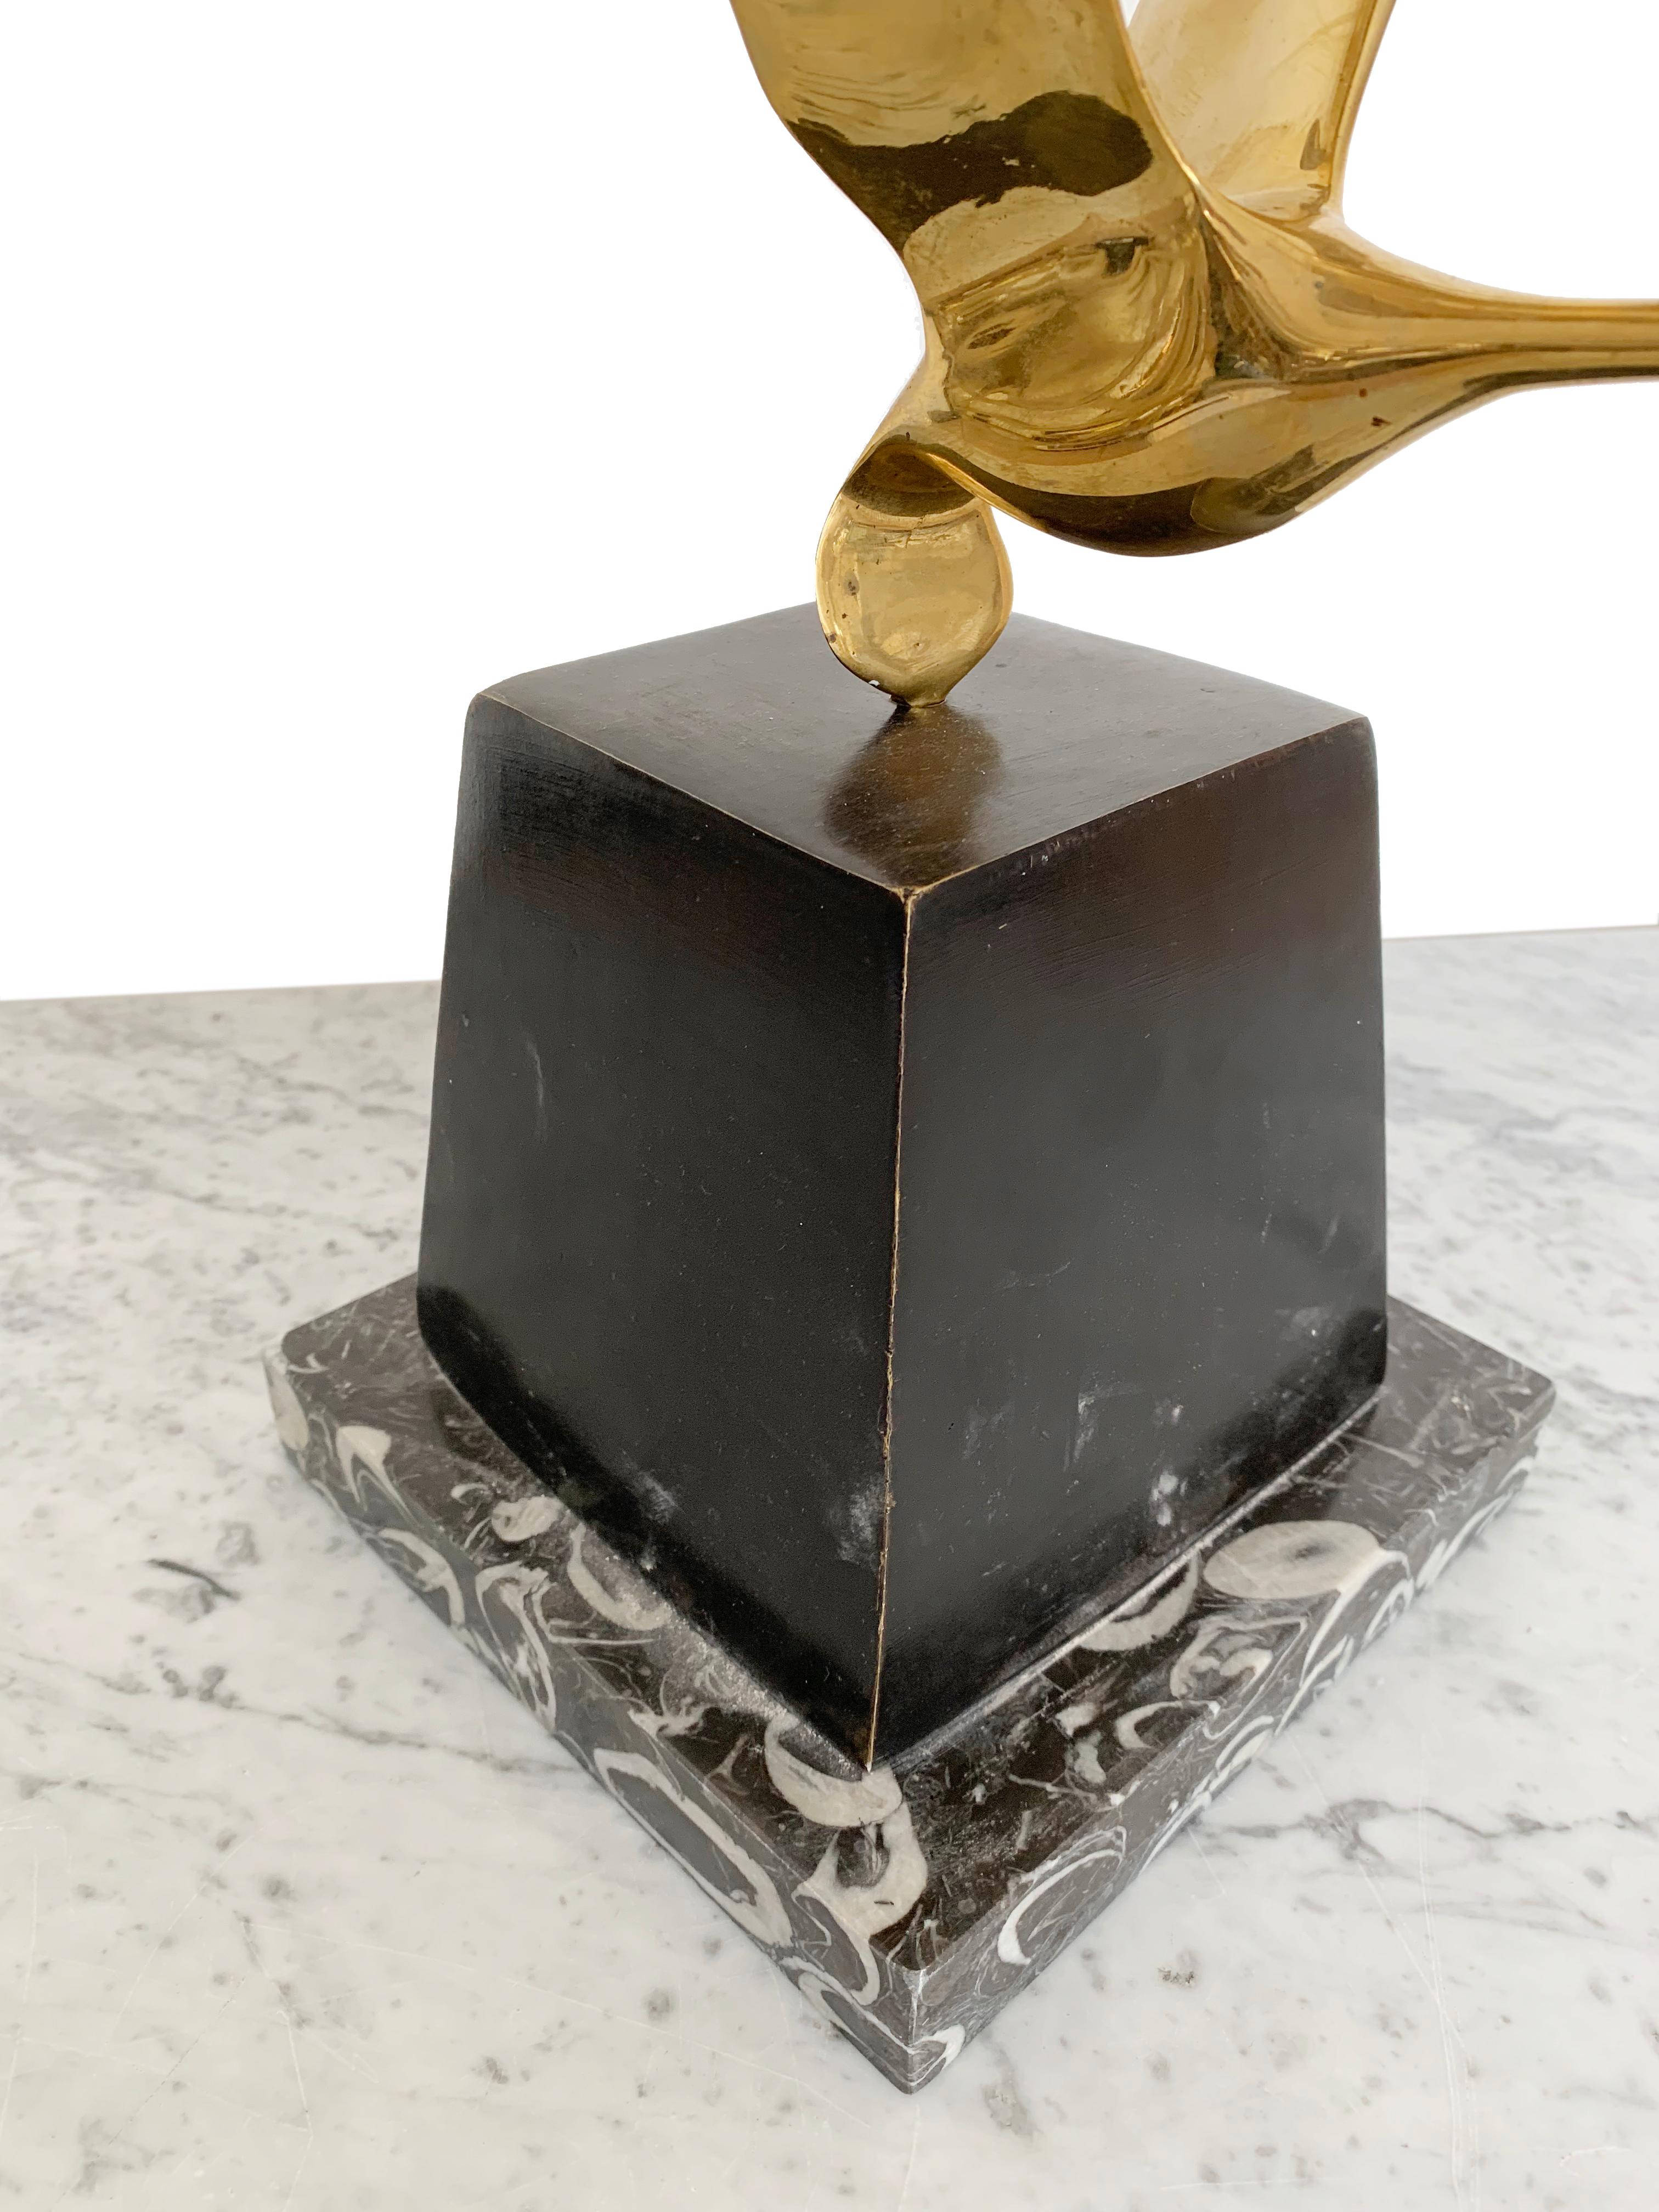 Elegant Mid-Century Modern polished brass sculptures in the form of flying wild birds.
Heavy geometric bronze body with original brown patina finishing on a polished marble base. The brass flying birds fit neatly into the bronze base.
The